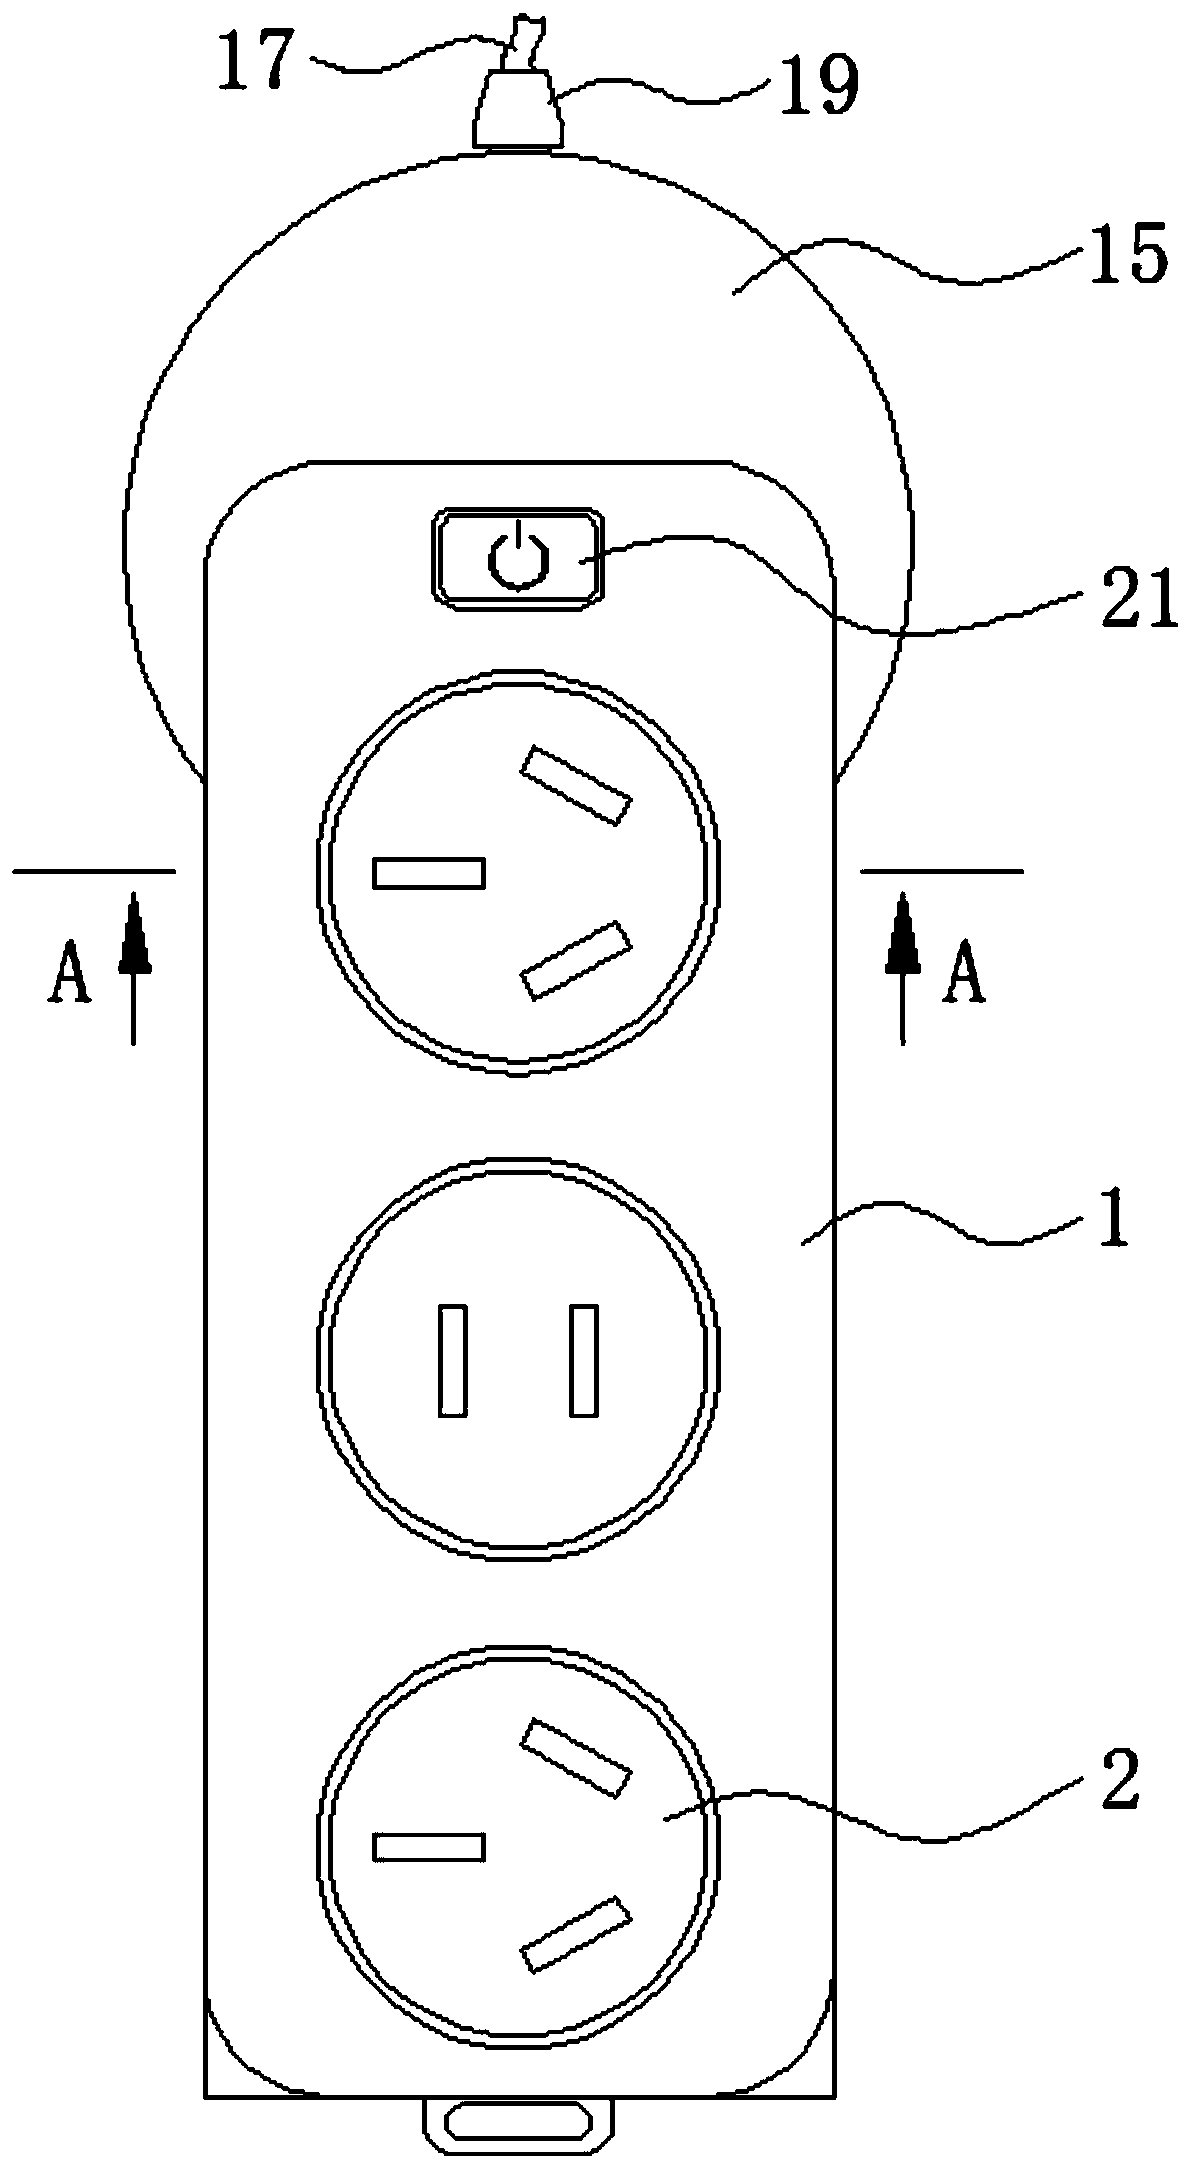 Anti-forgetting safety power strip based on electromagnetic transformation